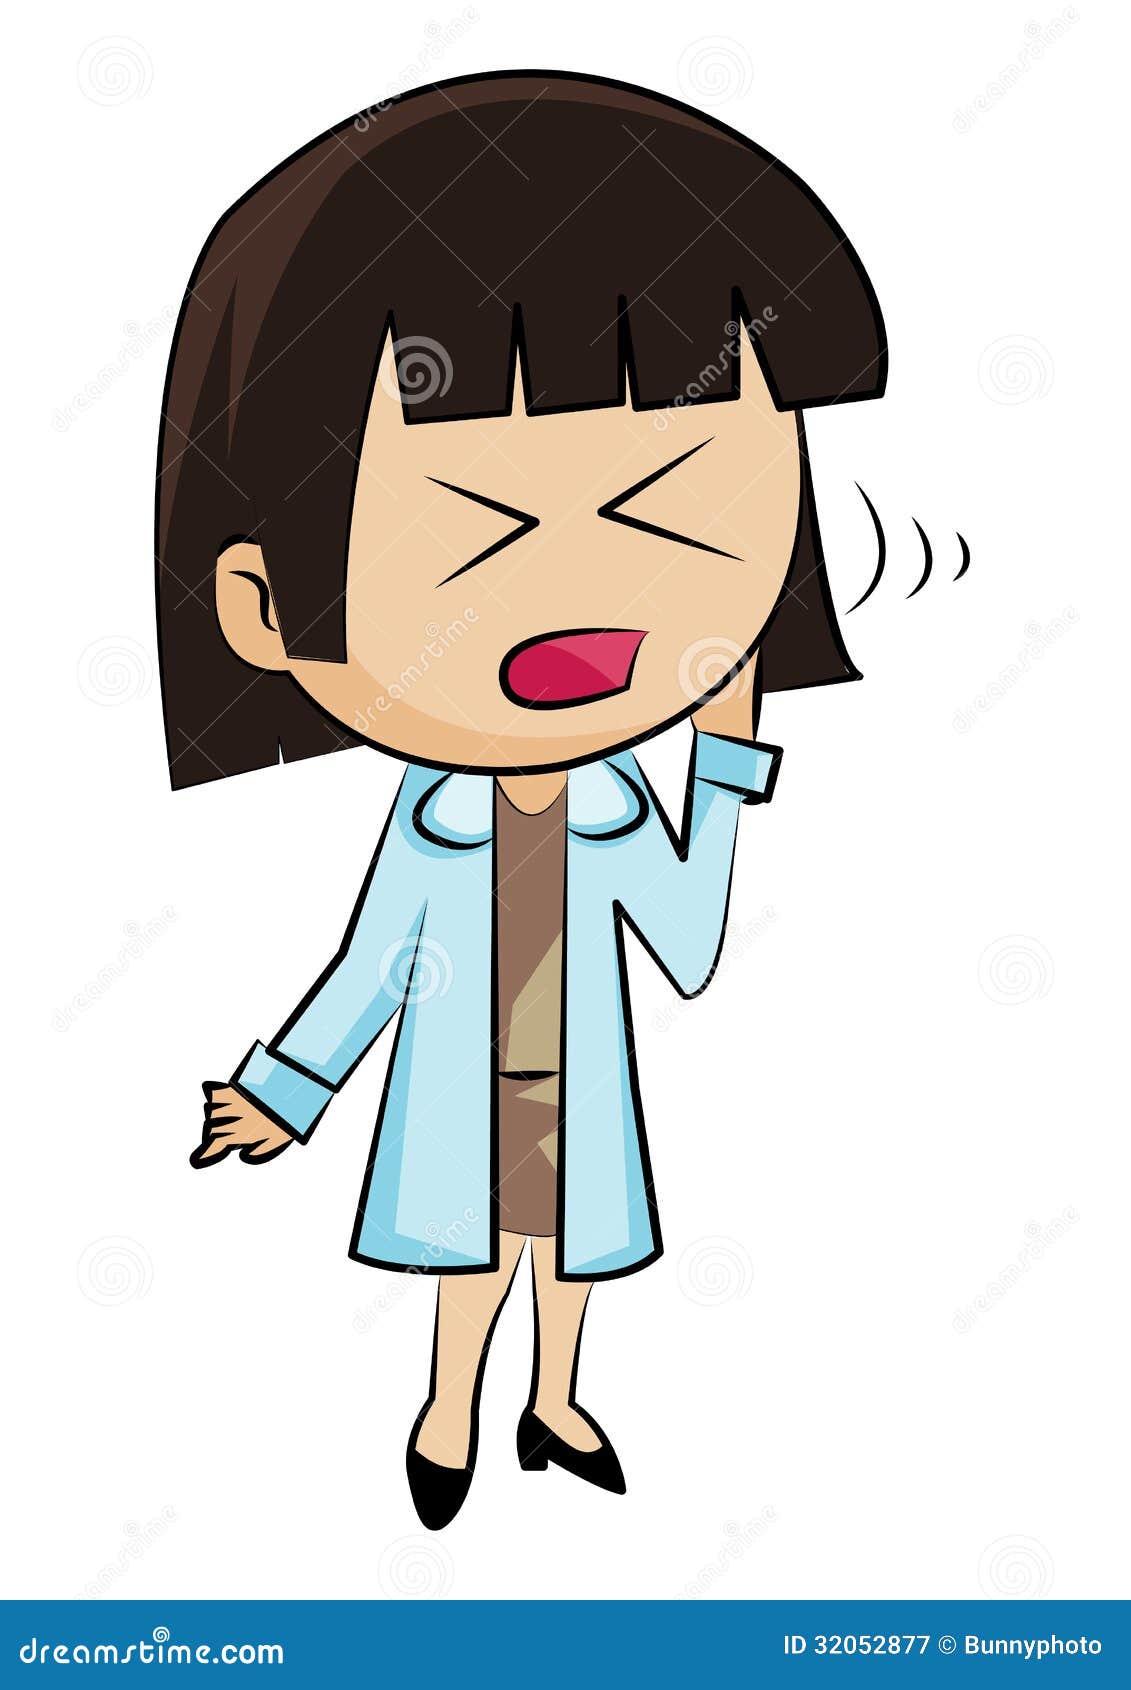 toothache clipart - photo #40